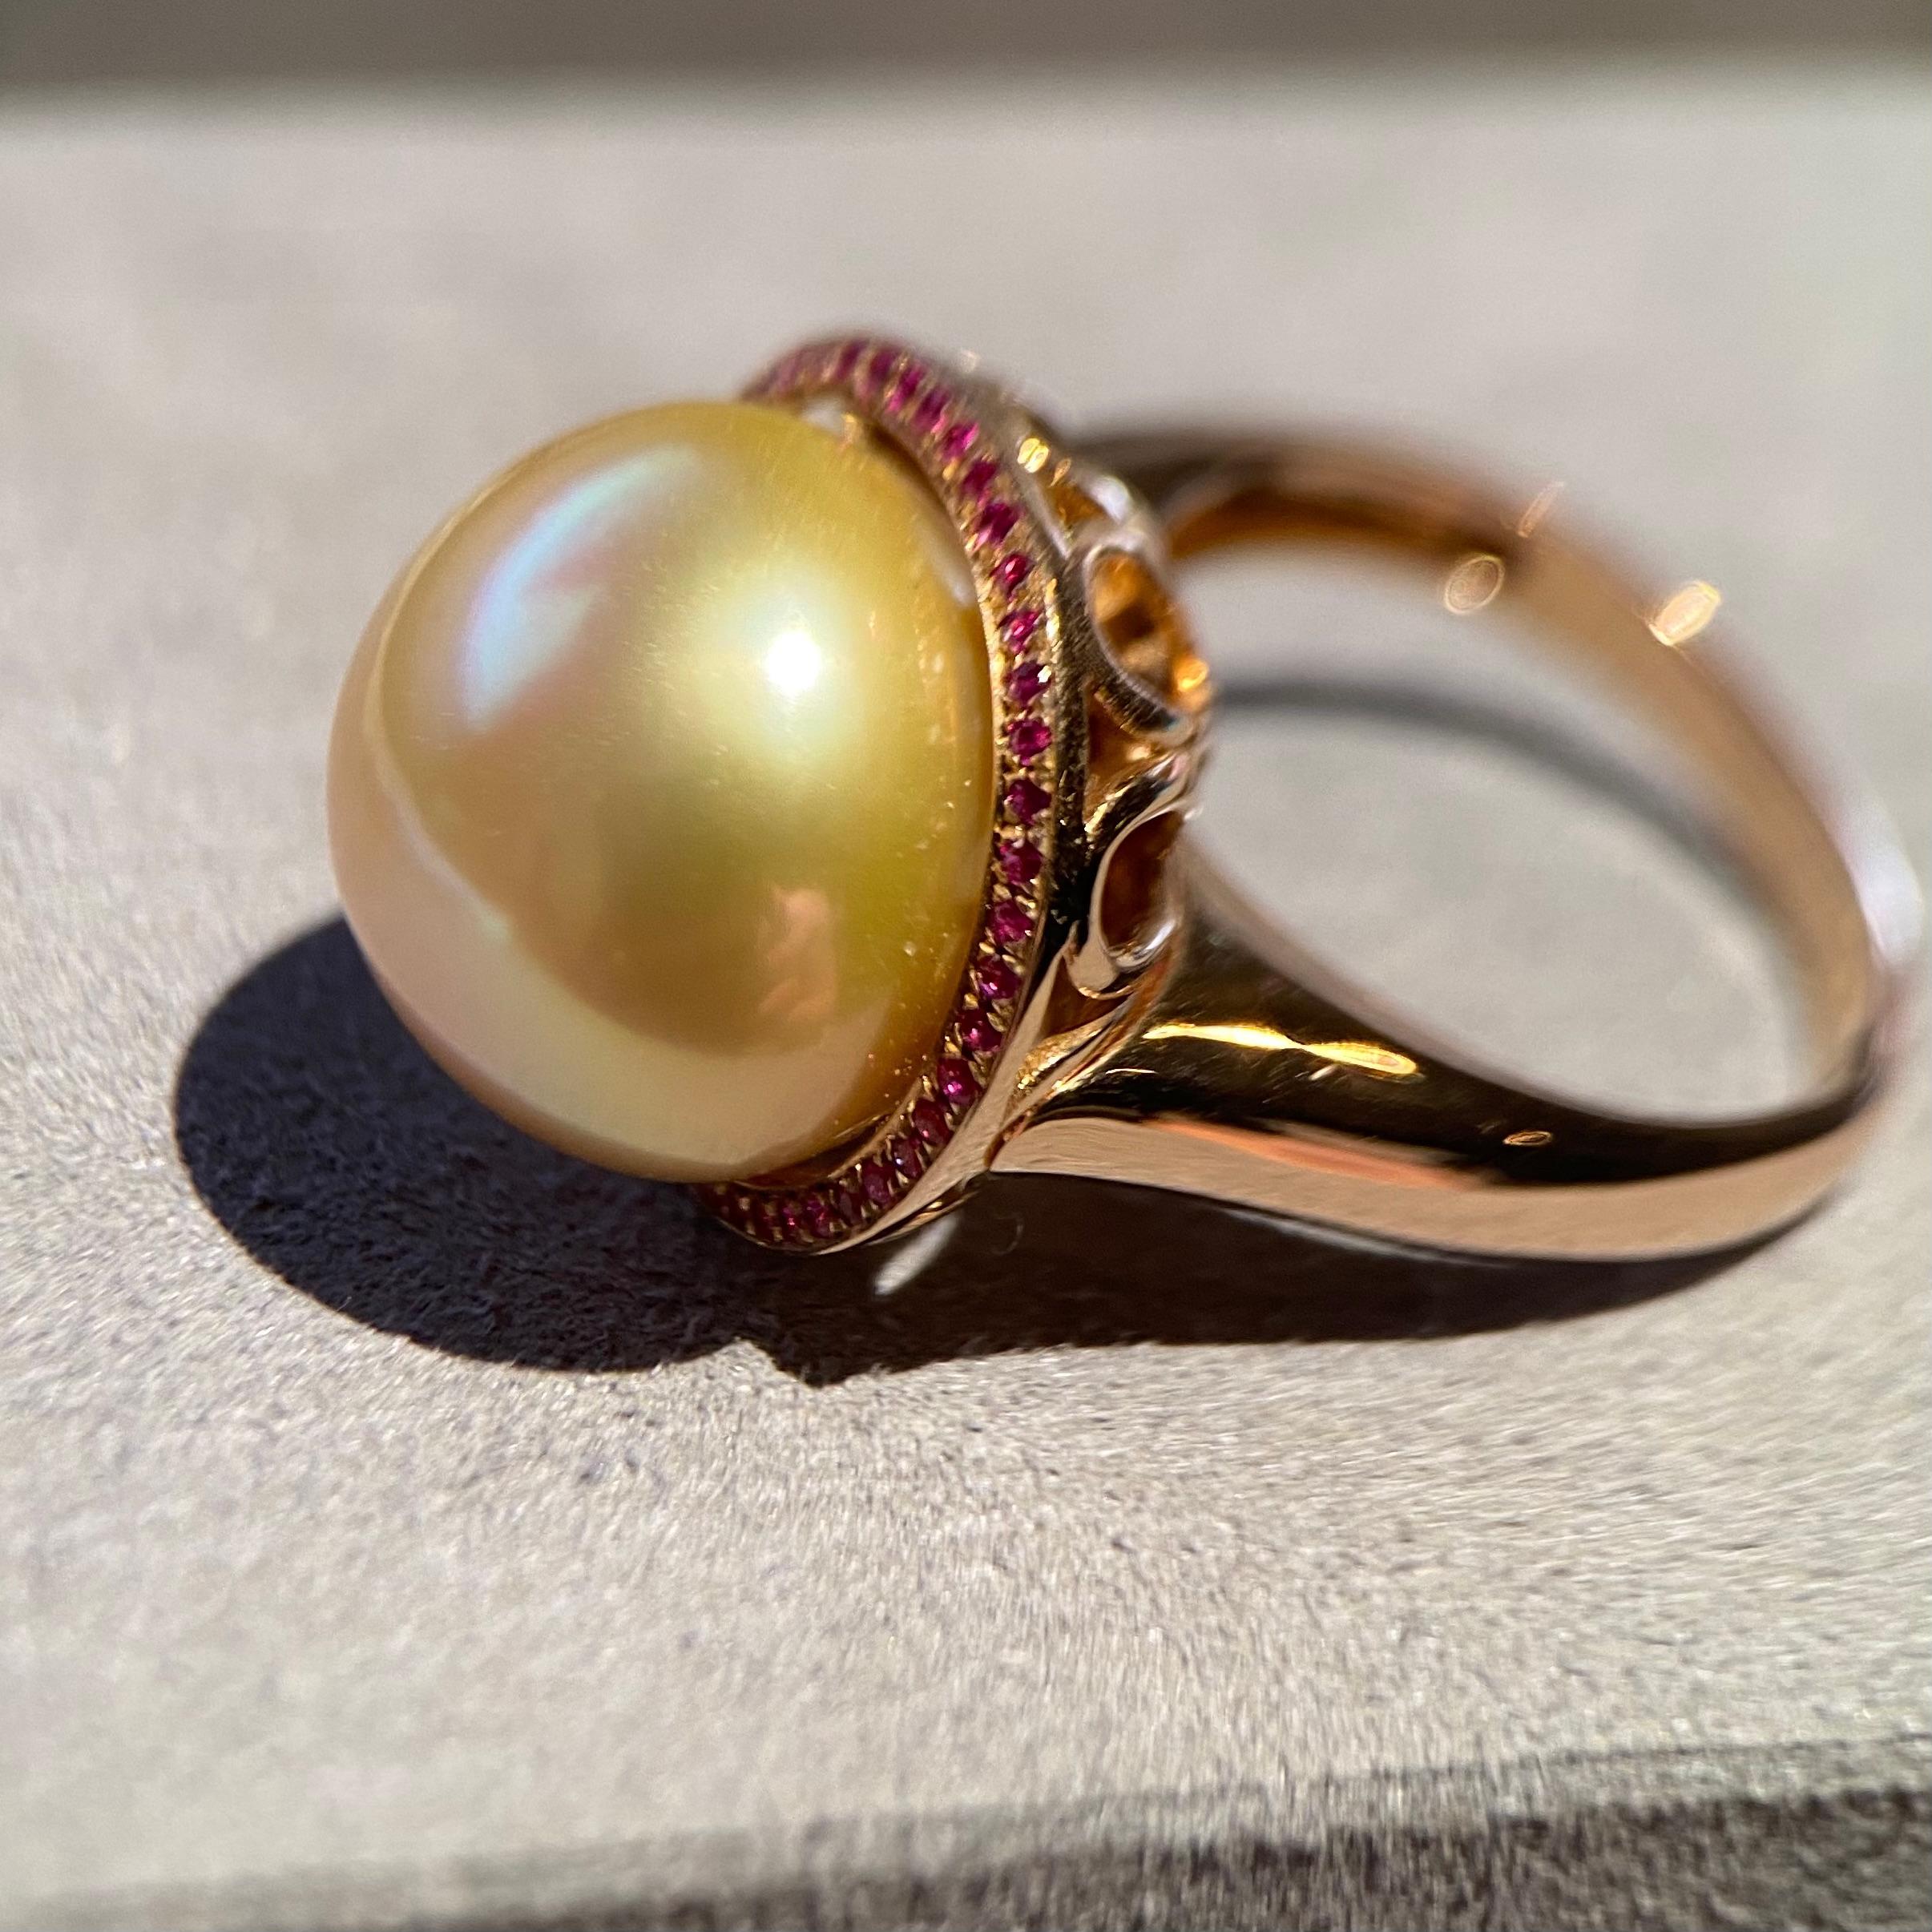 This is a Golden South Sea Pearl and Ruby Pendant Ring in 18K Rose Gold. The idea behind this piece is to bring out the passionate and fiery characteristic of the owner. The use of 18K Rose Gold really elevated the combination of Deep Golden colour